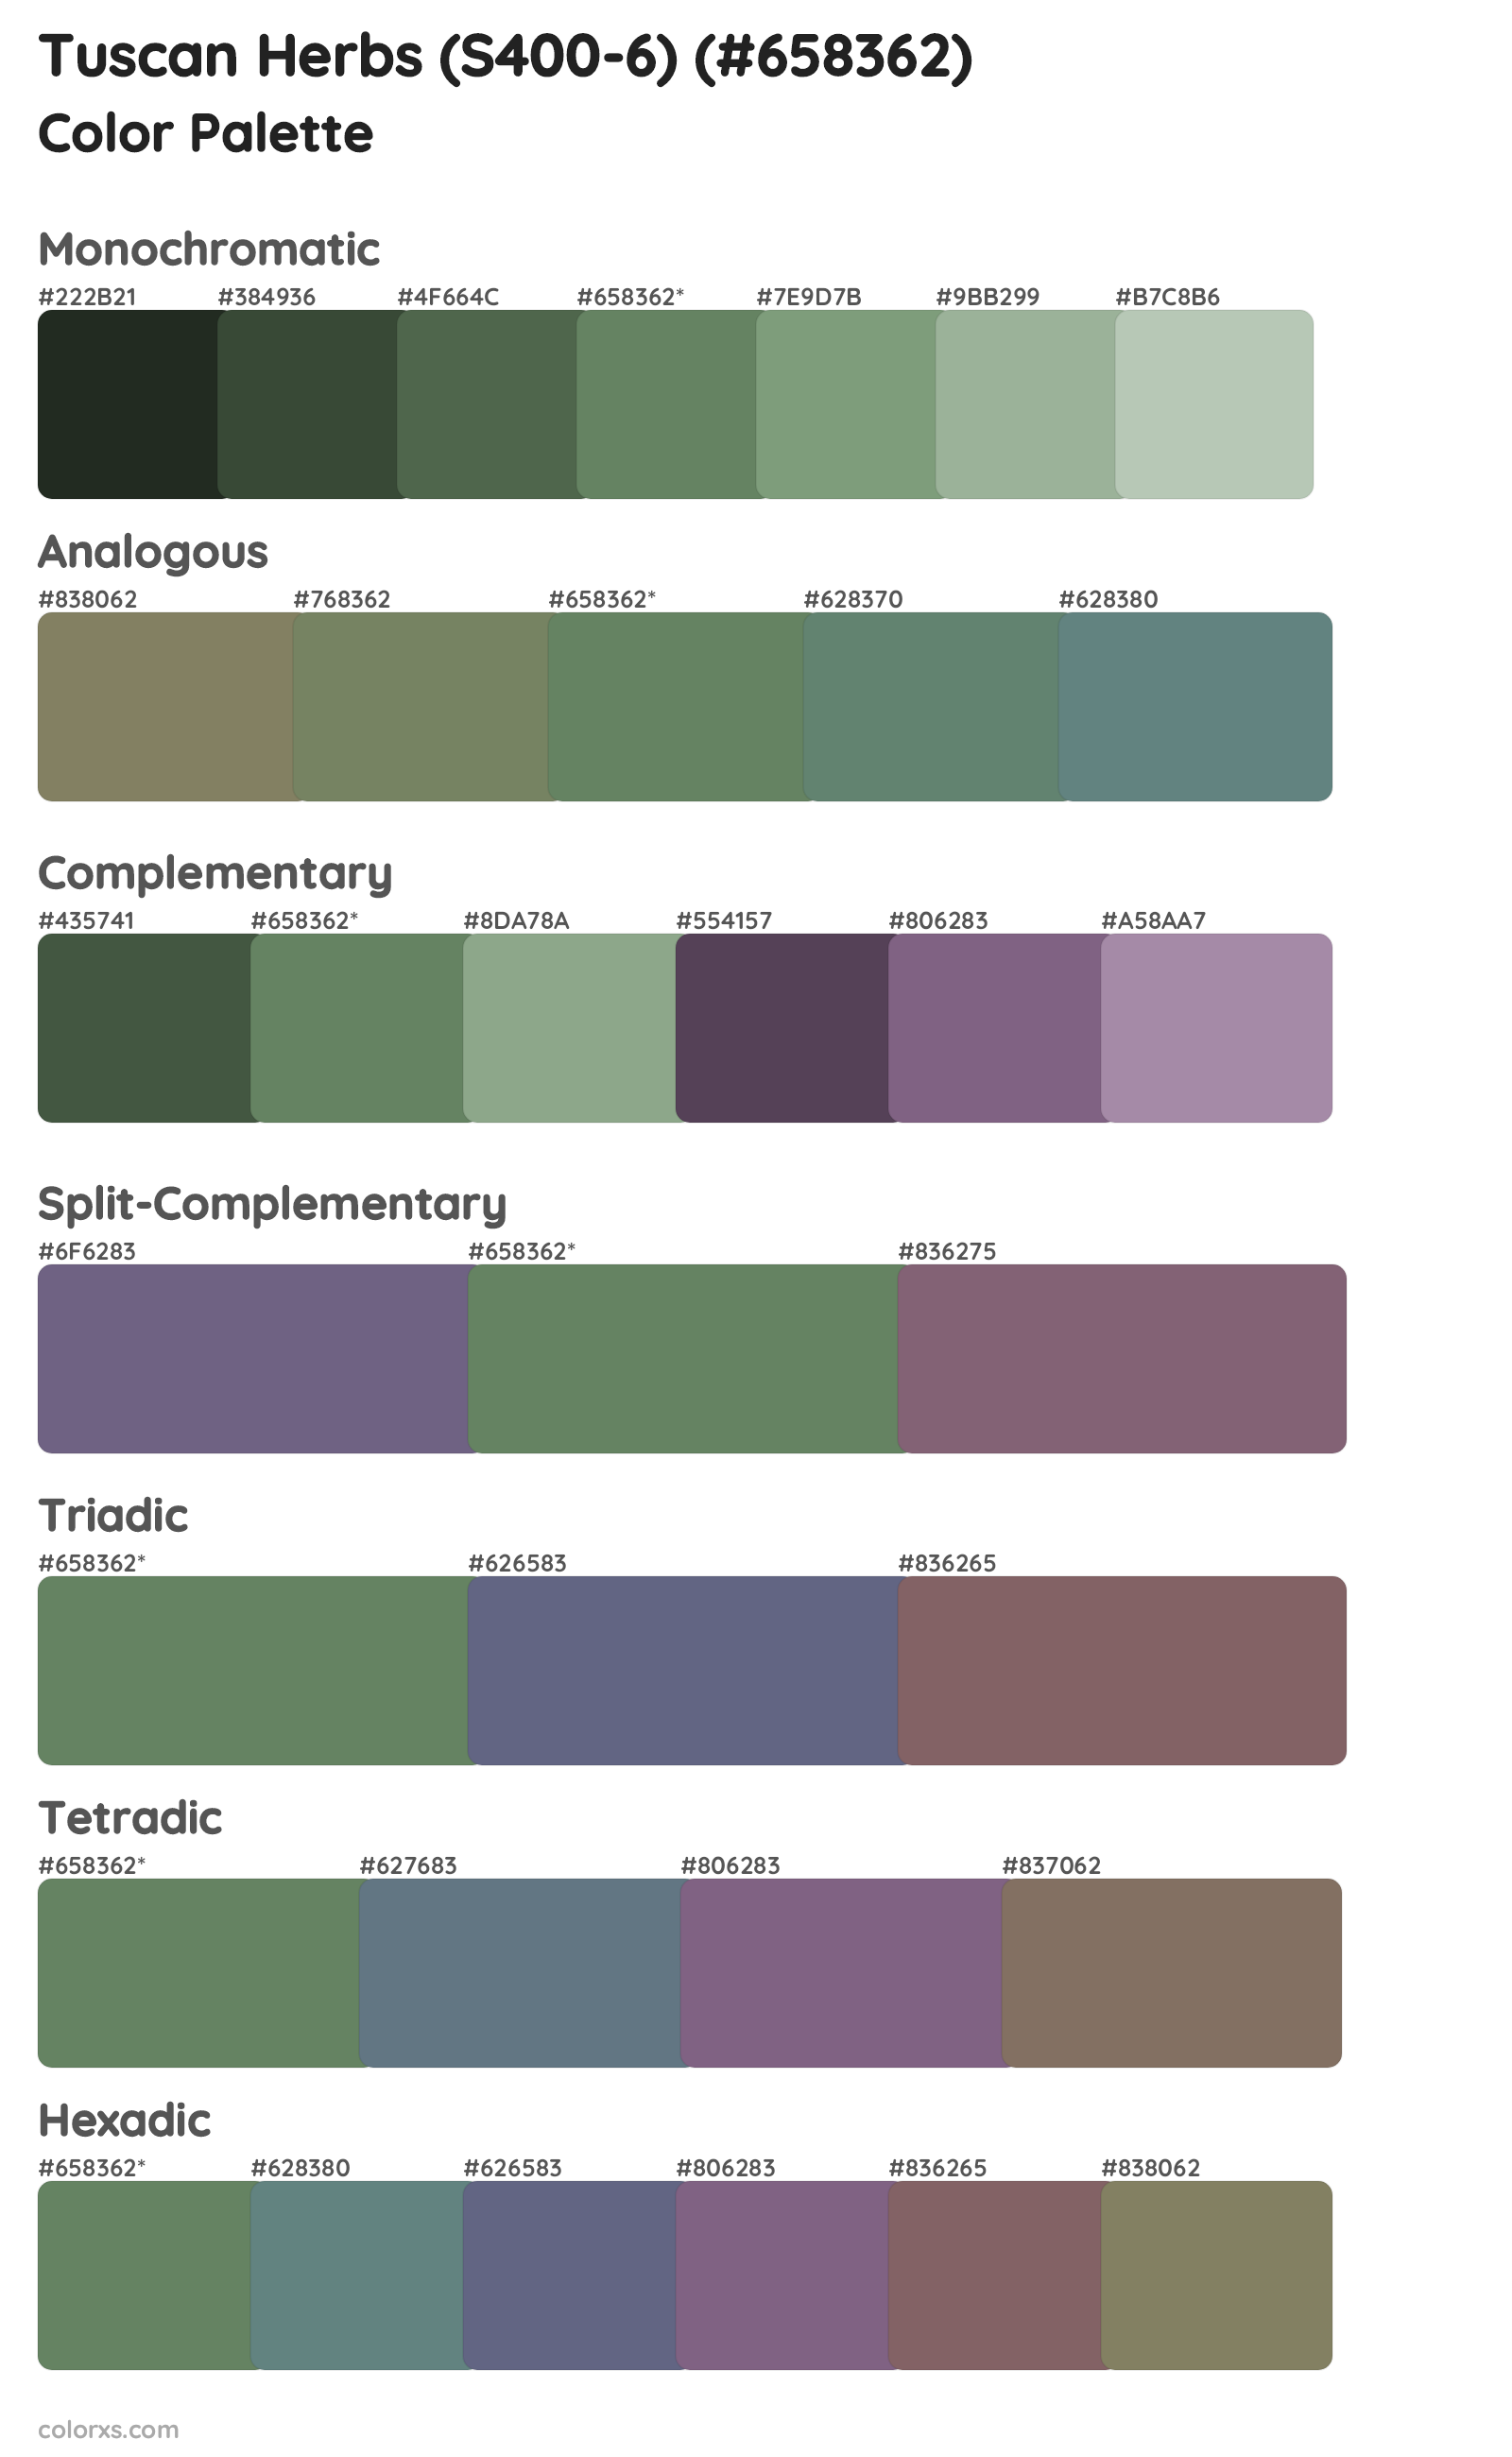 Tuscan Herbs (S400-6) Color Scheme Palettes